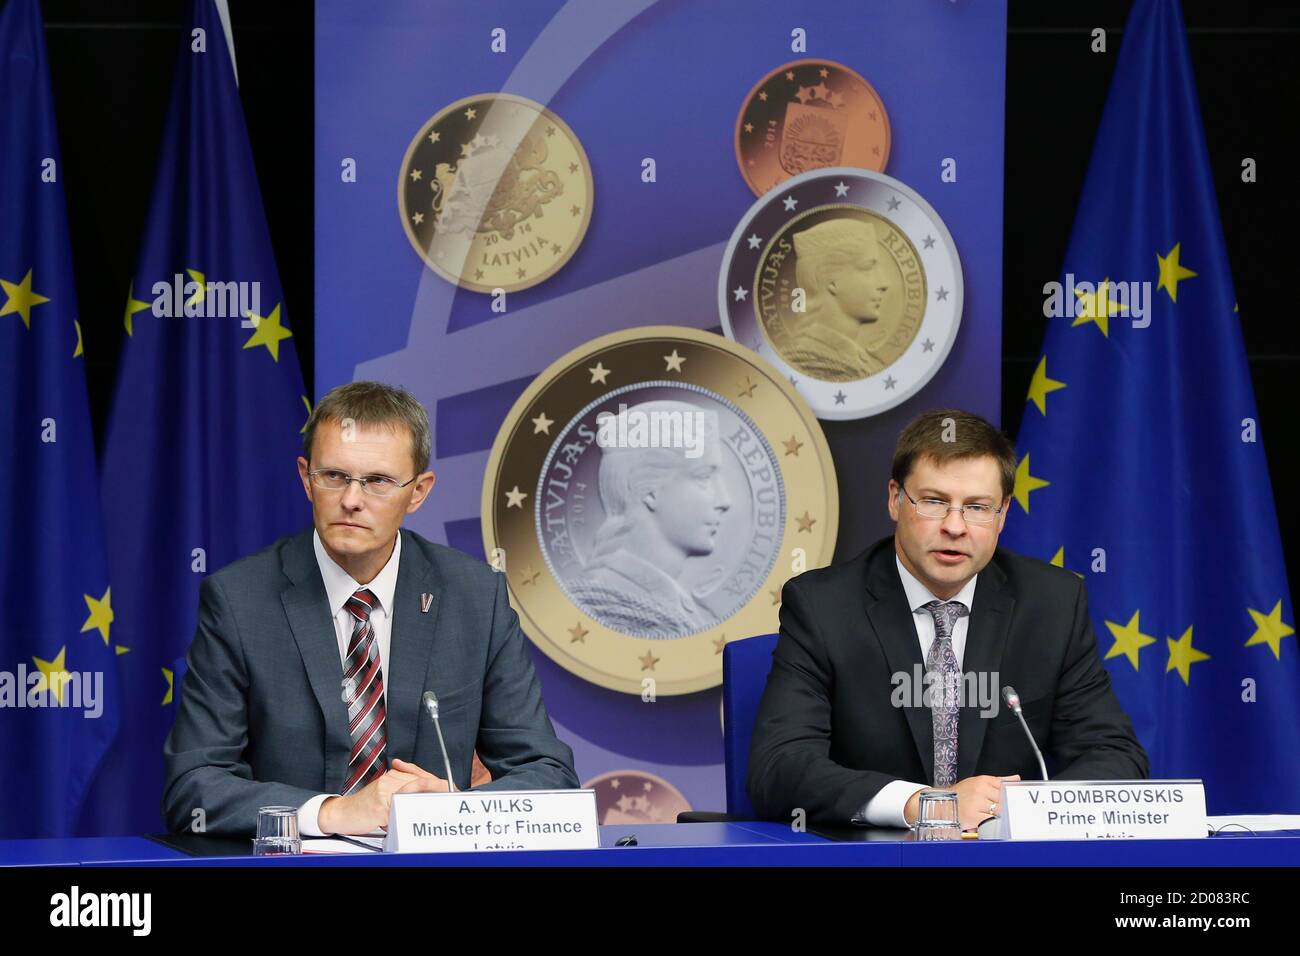 Latvia's Prime Minister Valdis Dombrovskis and Finance Minister Andris Vilks (L) address a news conference on the adoption of the euro by Latvia at the European Union council building in Brussels July 9, 2013. The euro zone embraced tiny Latvia as its newest member on Tuesday, eager to show that the bloc is not disintegrating while doubts remain about southern Europe's ability to overcome more than three years of crisis.   REUTERS/Francois Lenoir (BELGIUM - Tags: POLITICS BUSINESS) Stock Photo